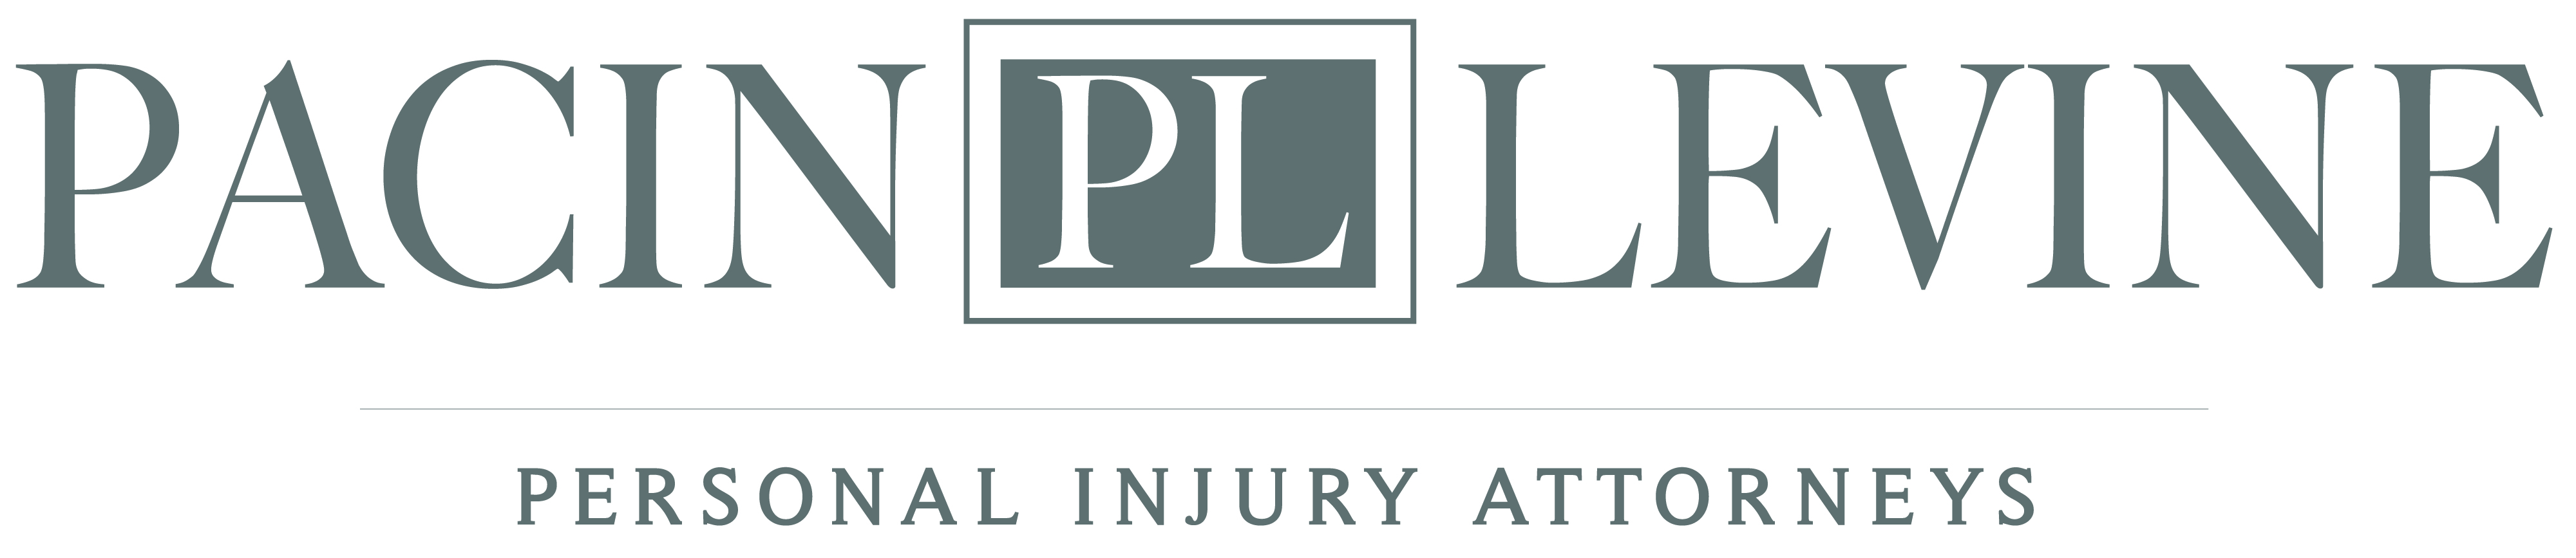 Pacin Levine, personal injury attorney and member of Doral Chamber of Commerce